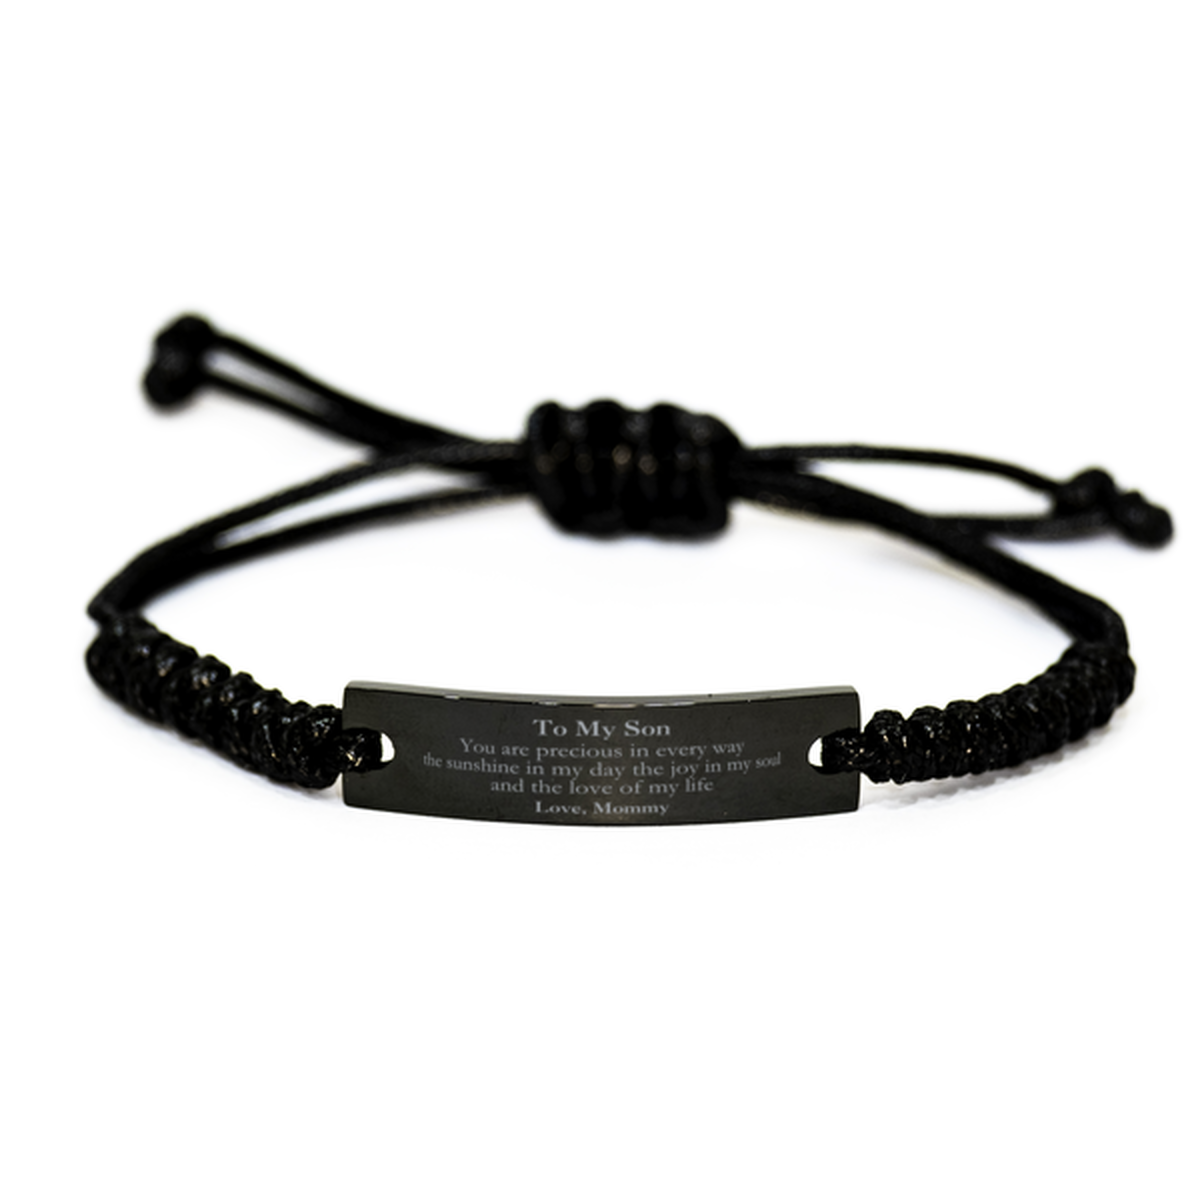 Graduation Gifts for Son Black Rope Bracelet Present from Mommy, Christmas Son Birthday Gifts Son You are precious in every way the sunshine in my day. Love, Mommy